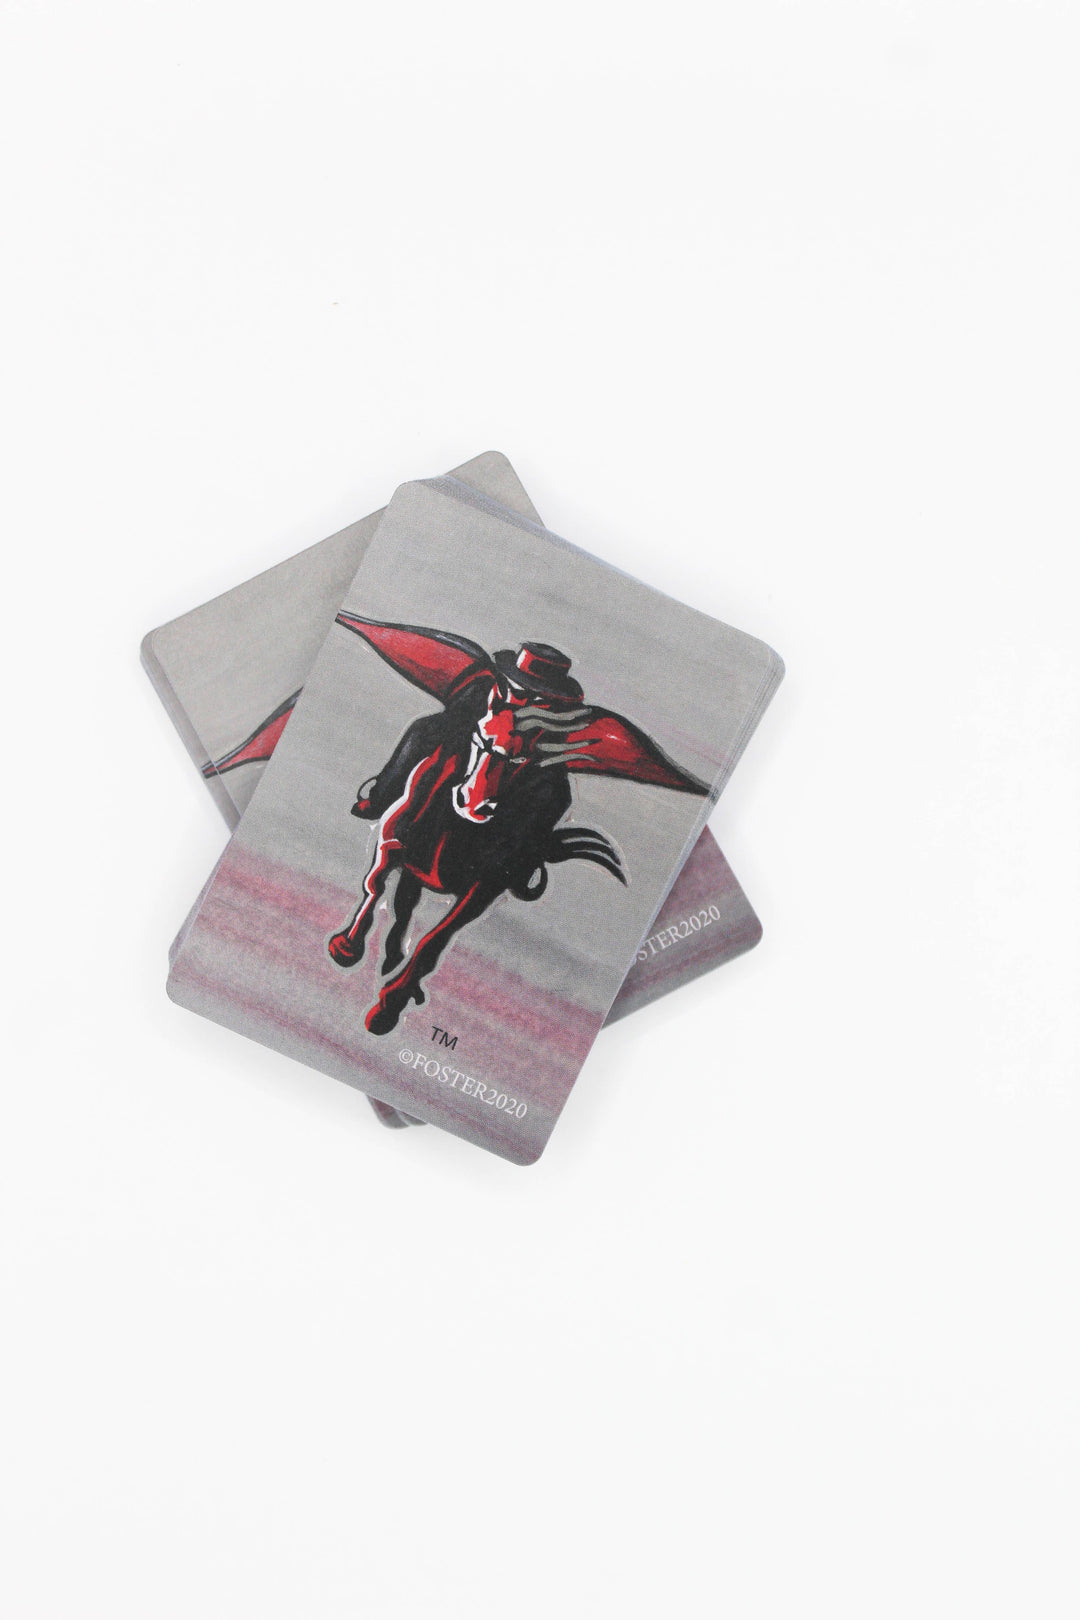 FOSTER - Texas Tech Playing Cards